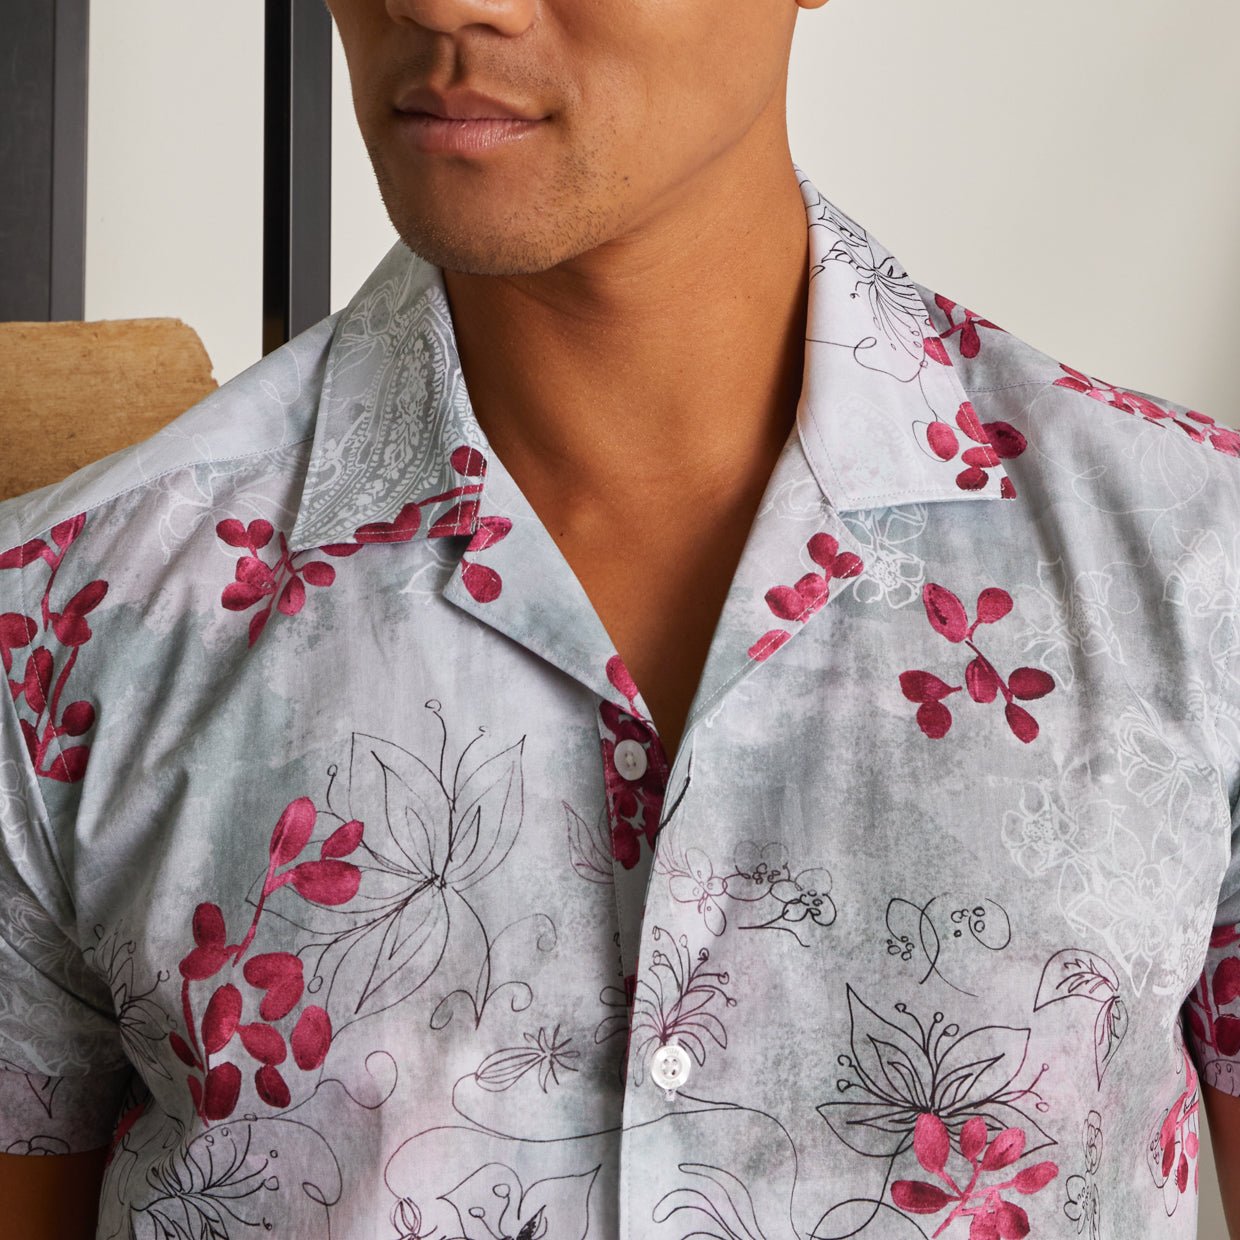 Japanese Flowers Open Collar Shirt (Limited Edition) - Blake Mill